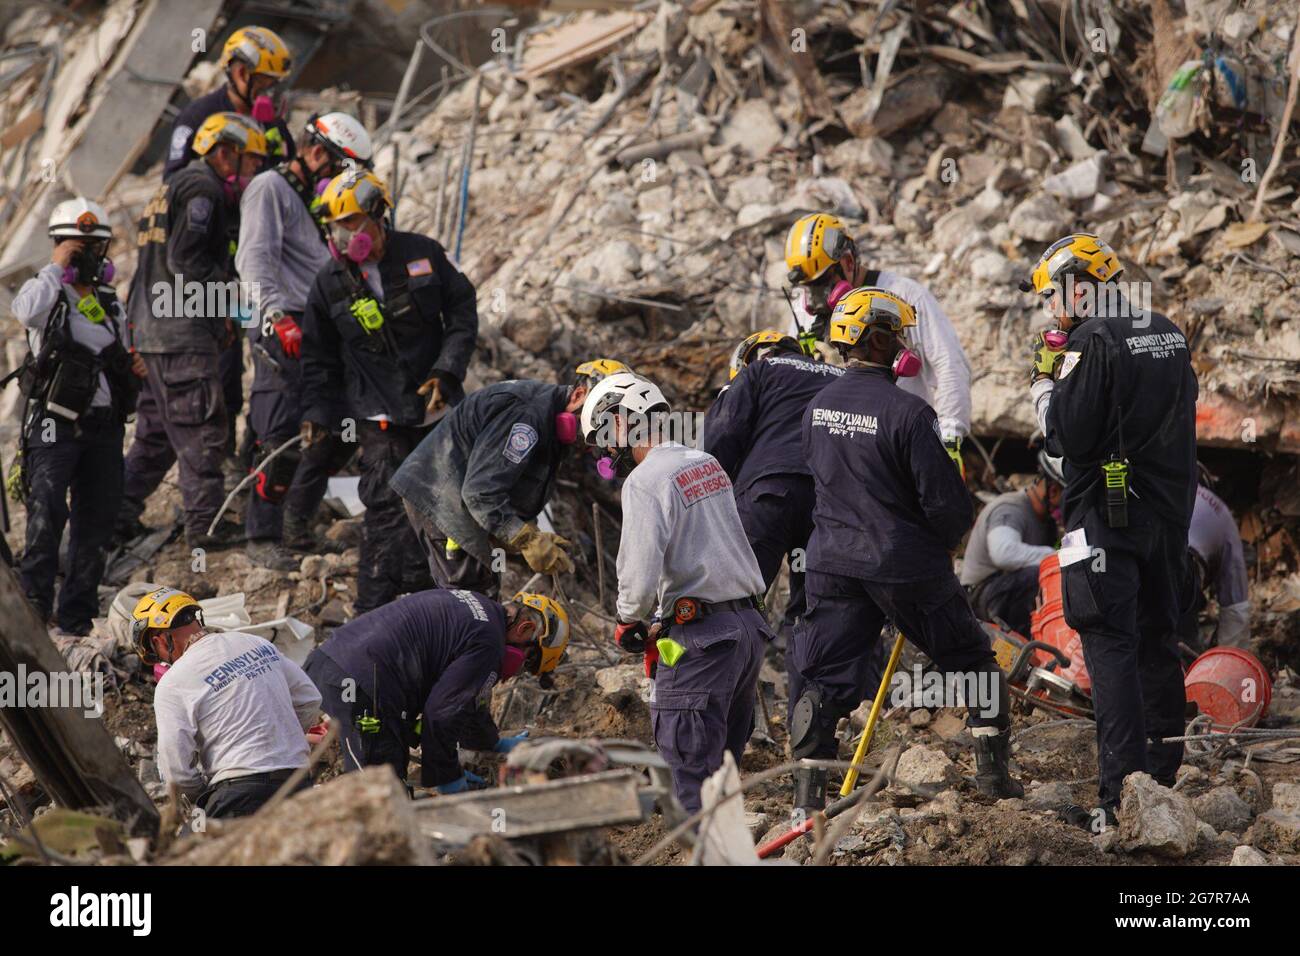 WASHINGTON, July 16, 2021 File photo released by the Miami-Dade Fire Rescue on July 8, 2021 shows task force members working at the residential building collapse site in Miami-Dade County, Florida, the United States. The search for victims in the condo collapse incident in Surfside, U.S. state Florida, neared the end, with death toll now standing at 97, local authorities said Thursday, exactly three weeks after the disaster happened. (Miami-Dade Fire Rescue/Handout via Xinhua) Stock Photo